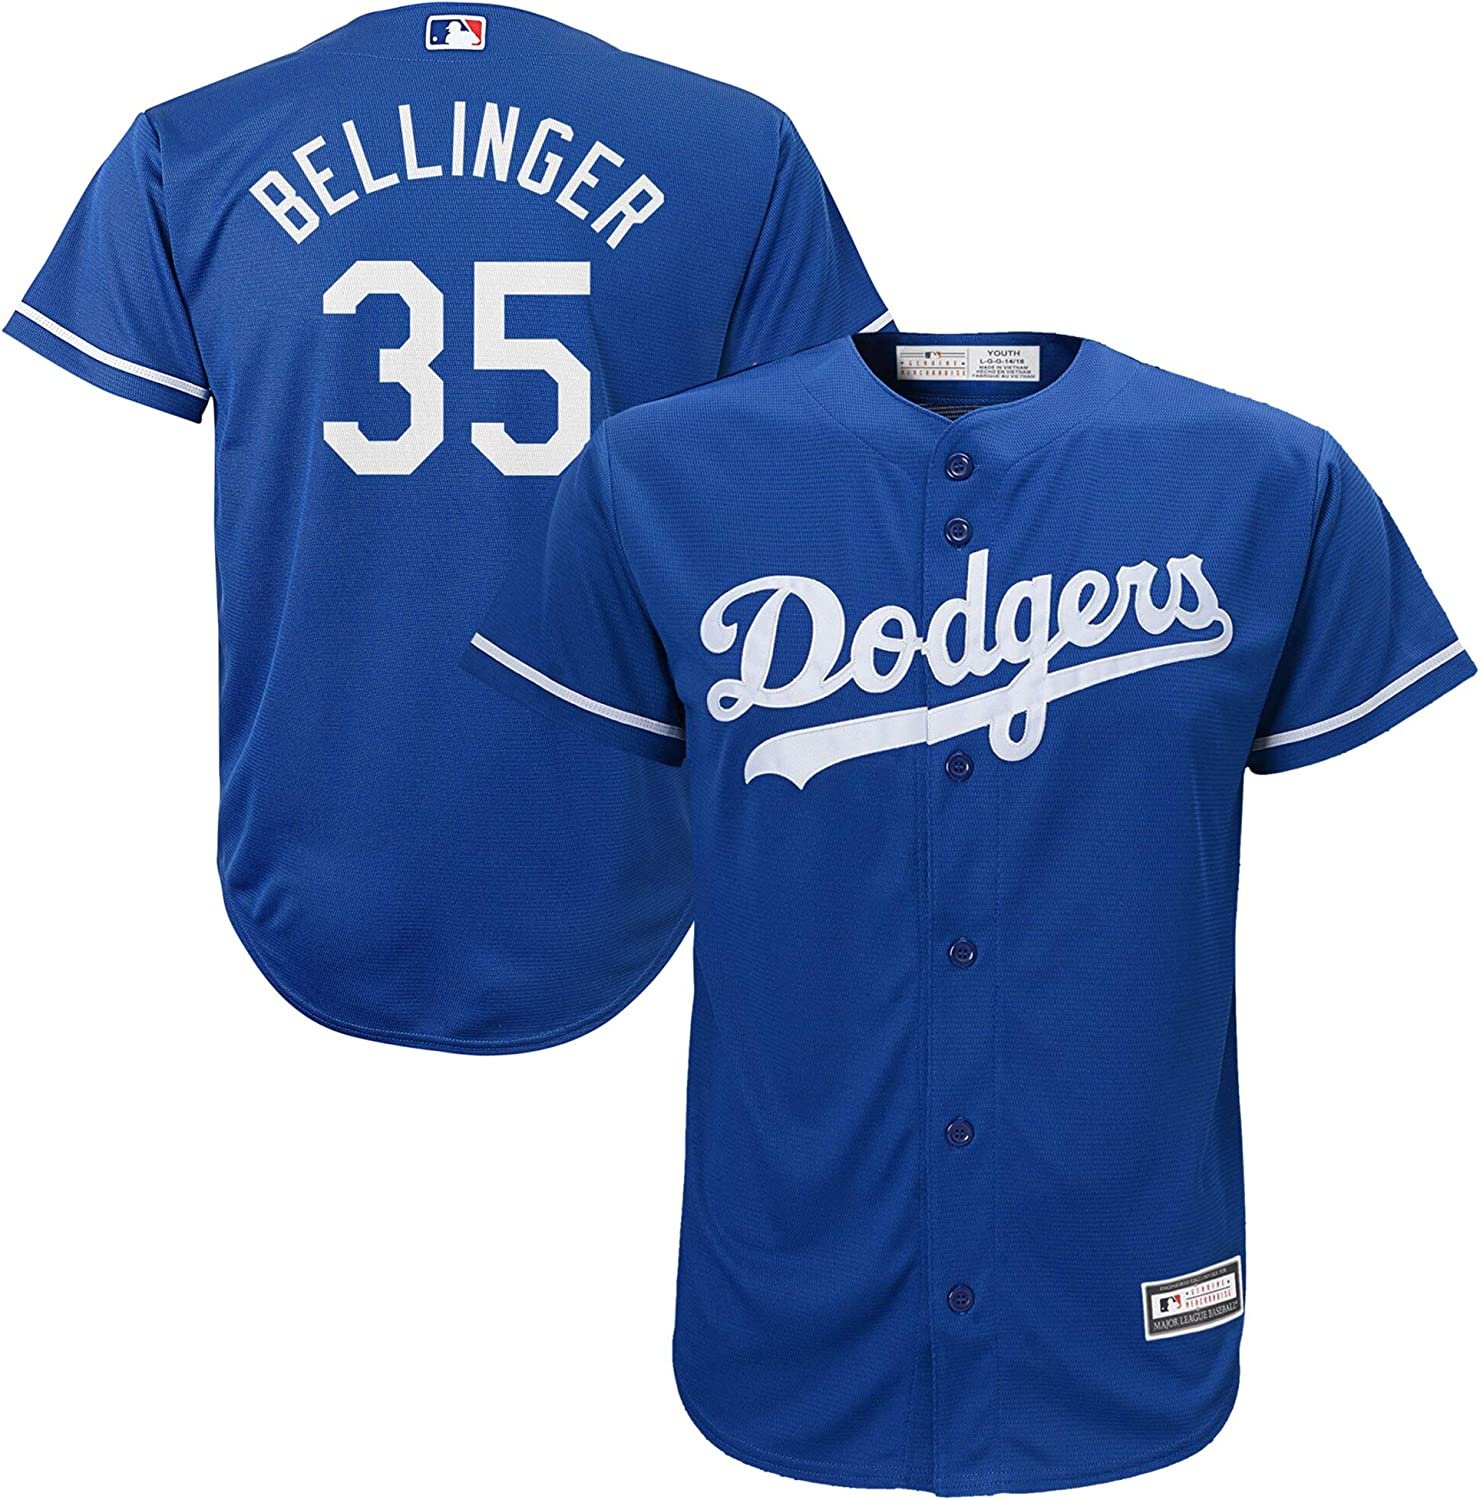 Outerstuff Cody Bellinger Los Angeles Dodgers MLB Boys Youth 8-20 Player  Jersey